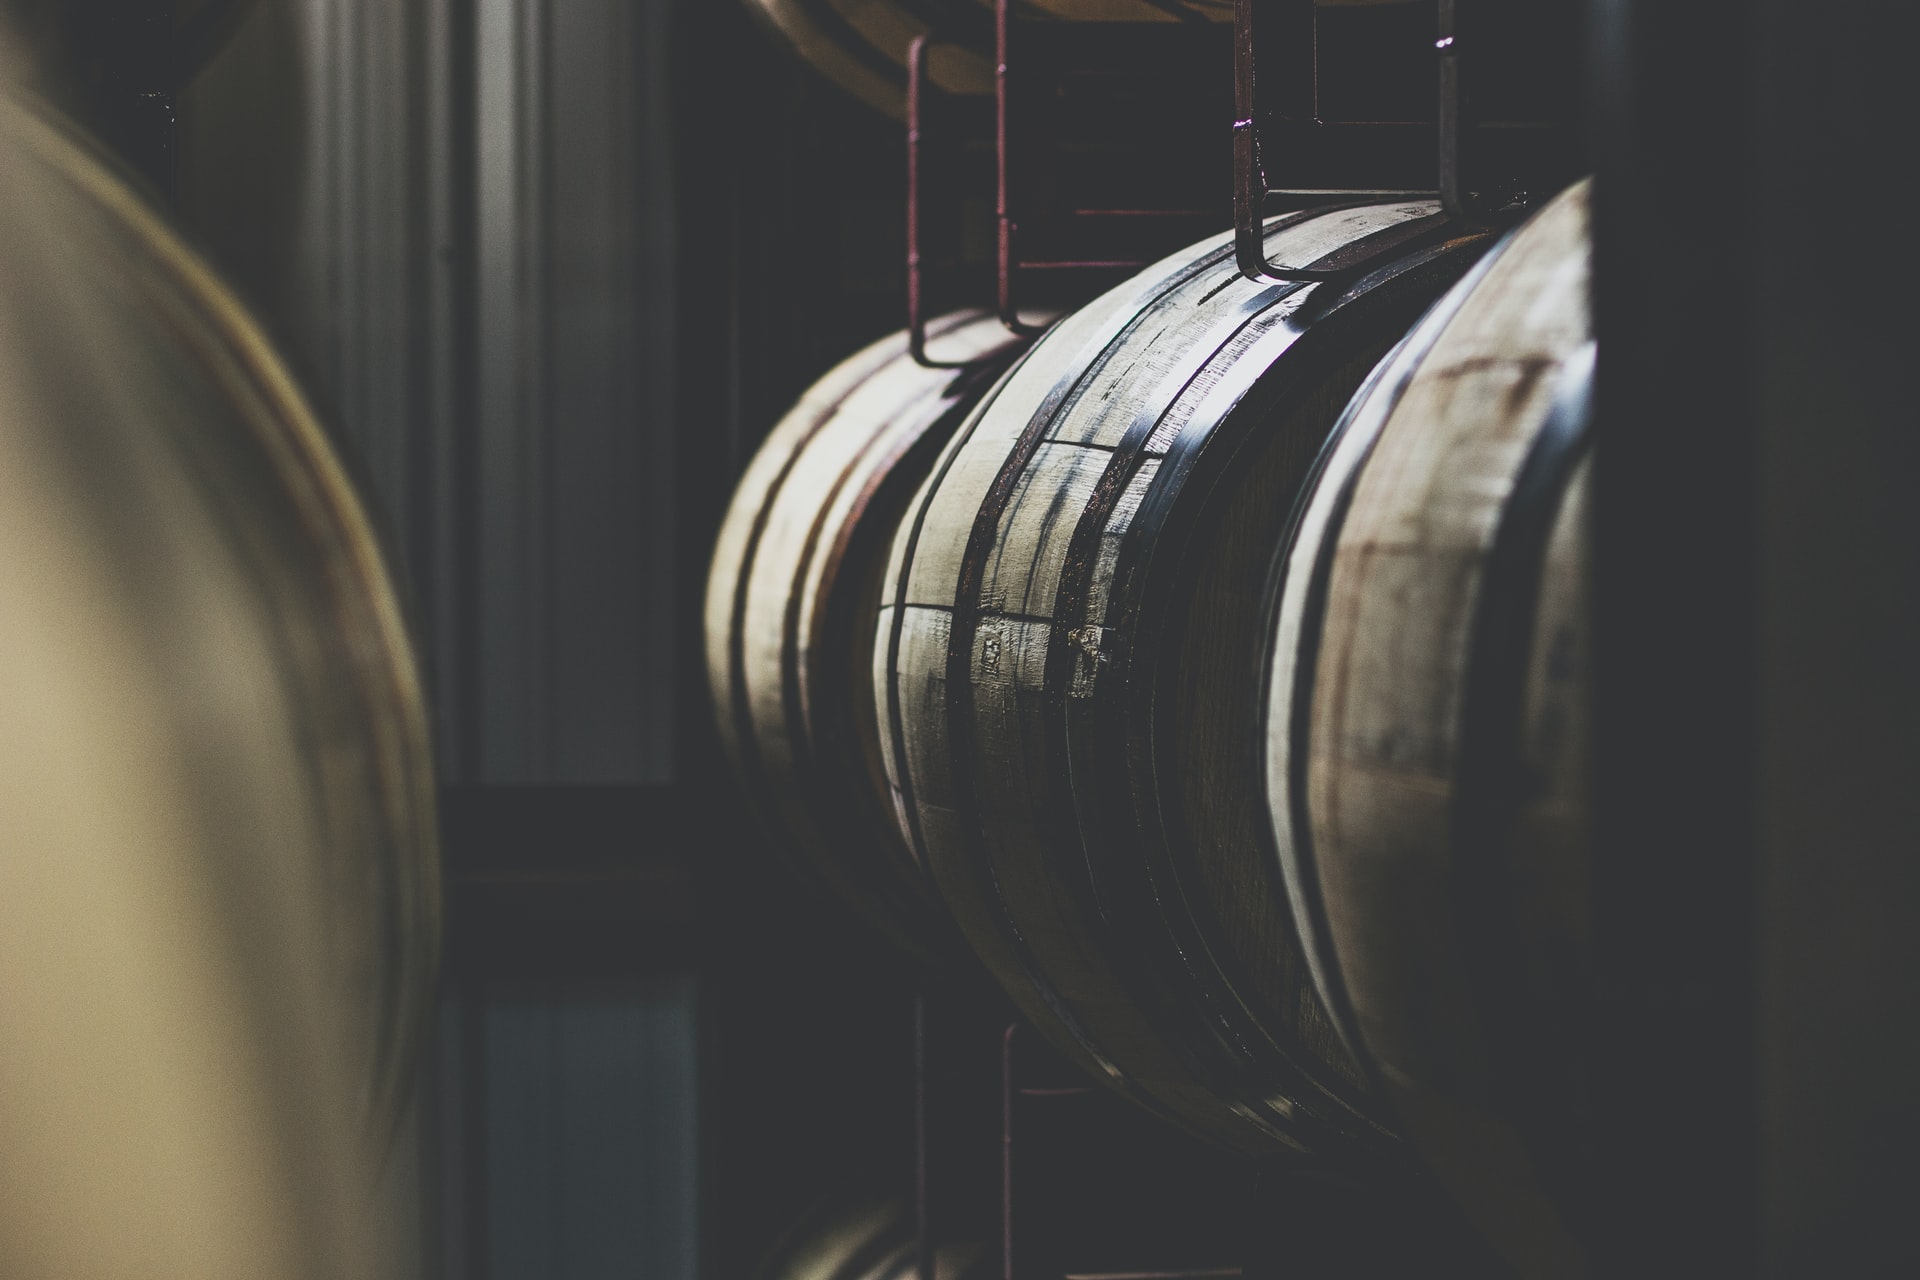 Whiskey and Barrels, You Can’t Have One Without the Other